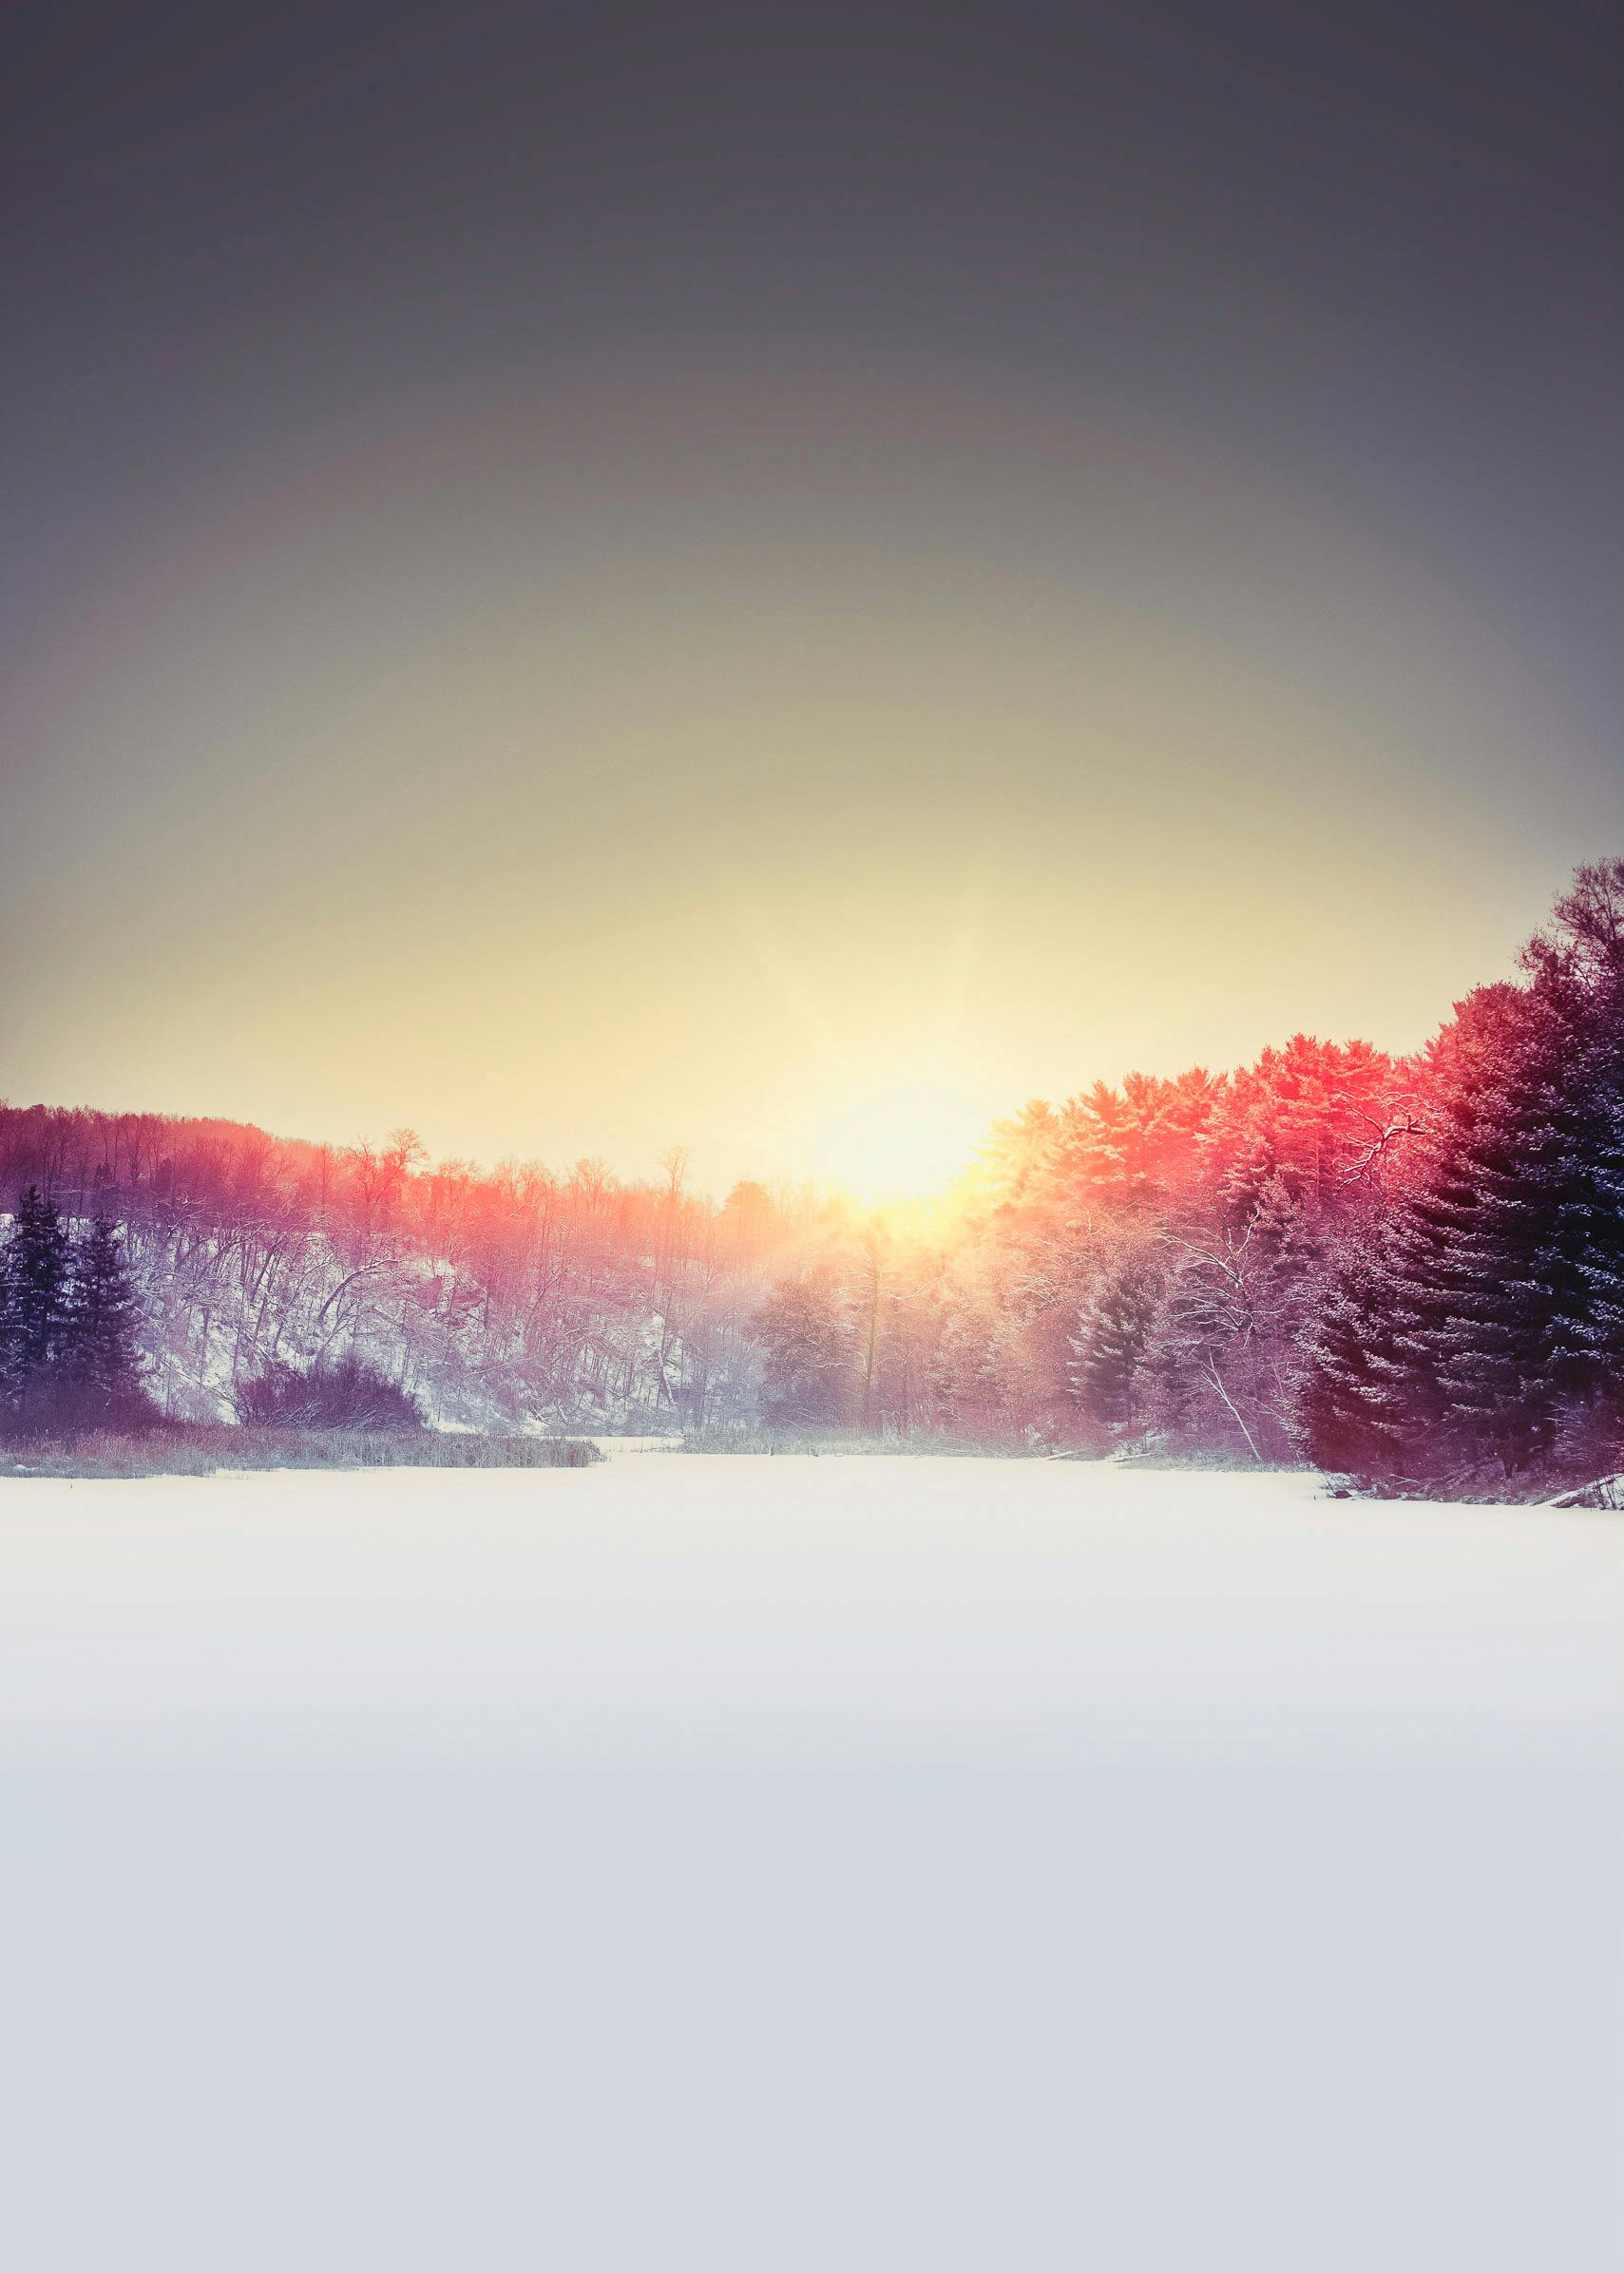 Free stock photo of android wallpaper, evening sun, frozen